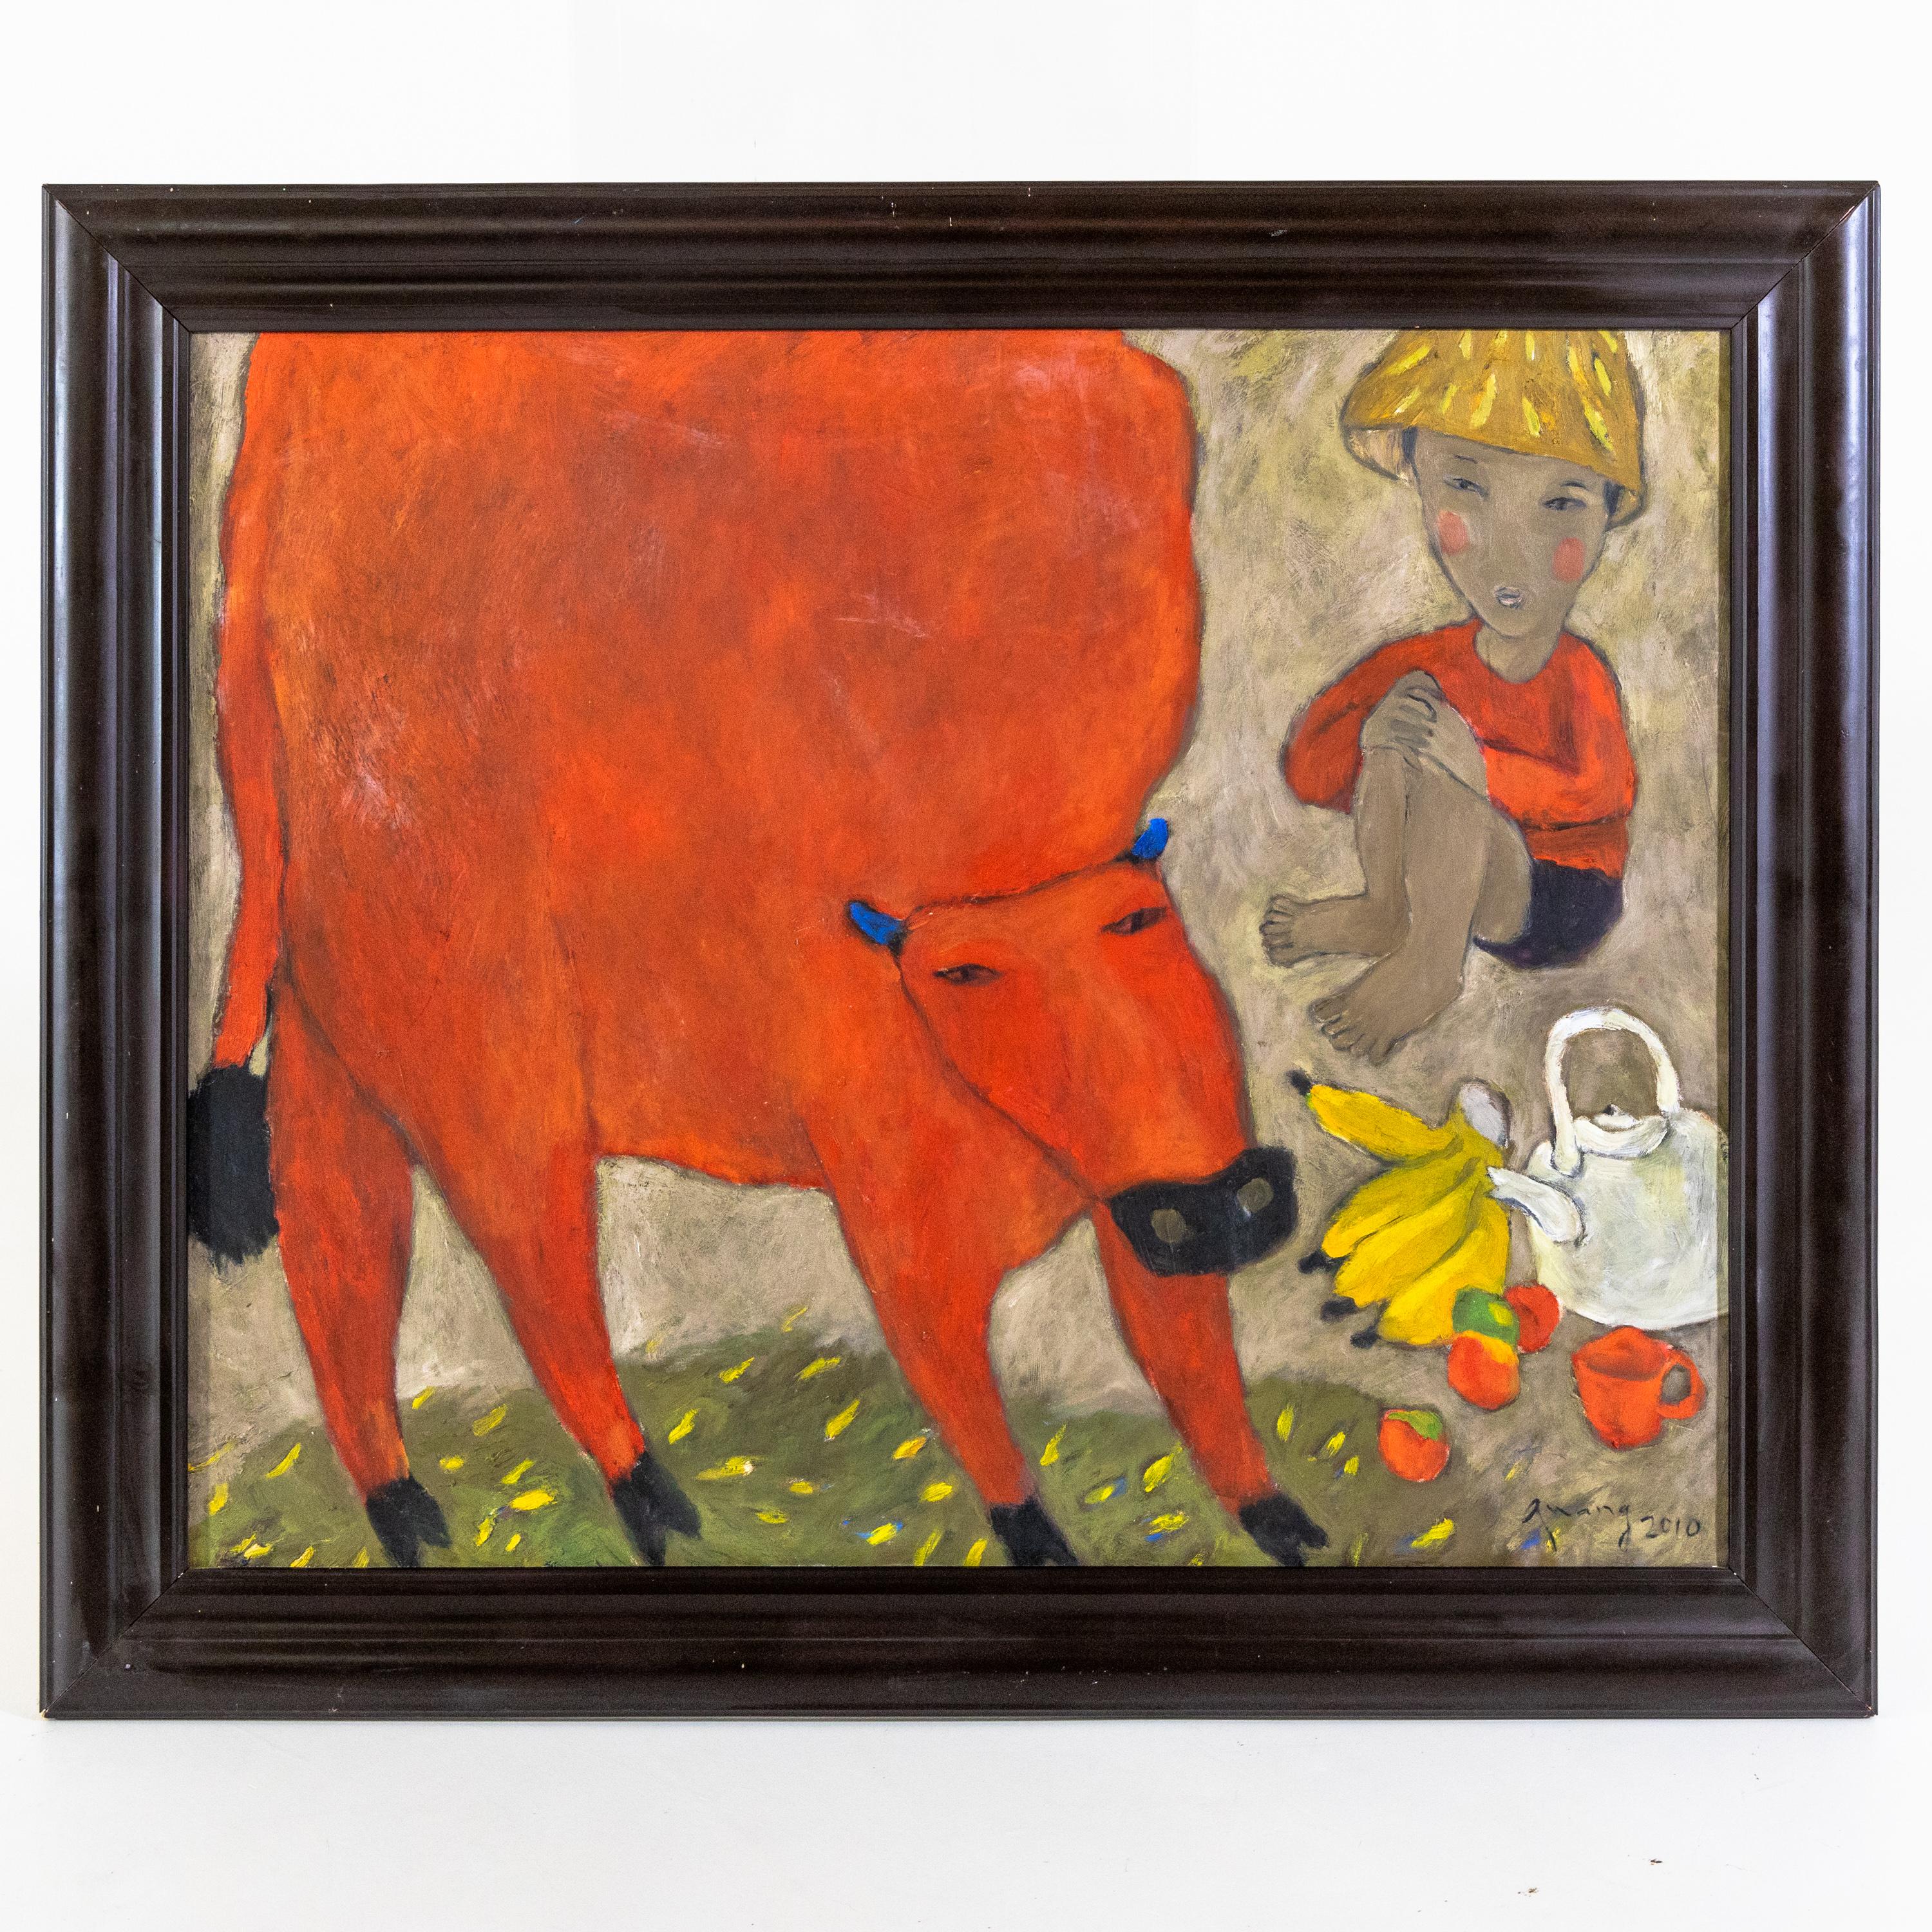 Painting in oil on canvas with an abstract image of a red cow with blue horns and a child with a hat as well as a tea kettle and some fruit. Signed and dated Quang 2010 in the bottom right. In a black wooden frame.